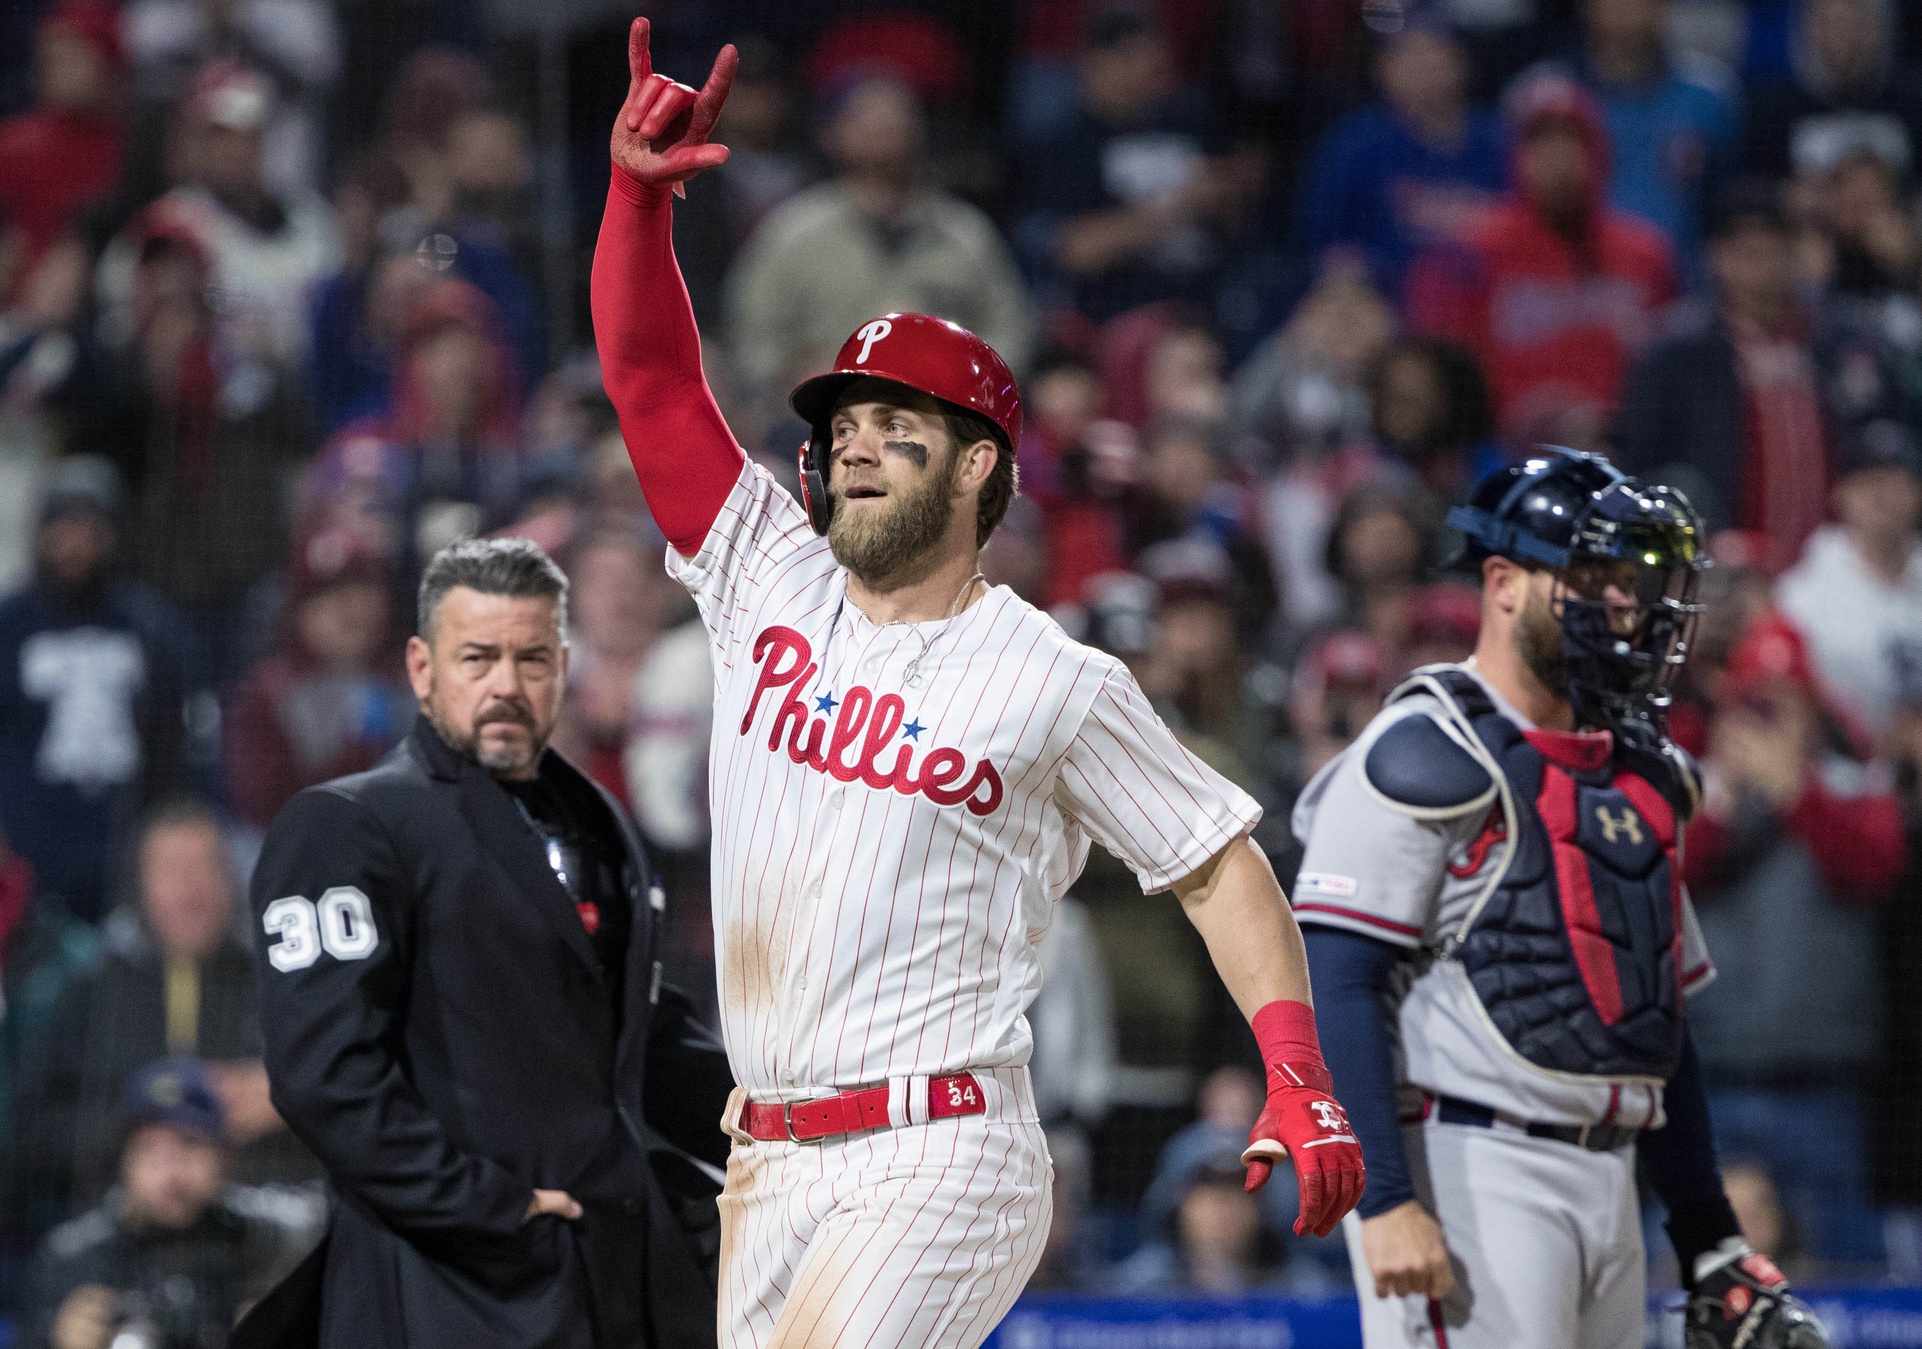 Yes, This is a Big Series for the Phillies